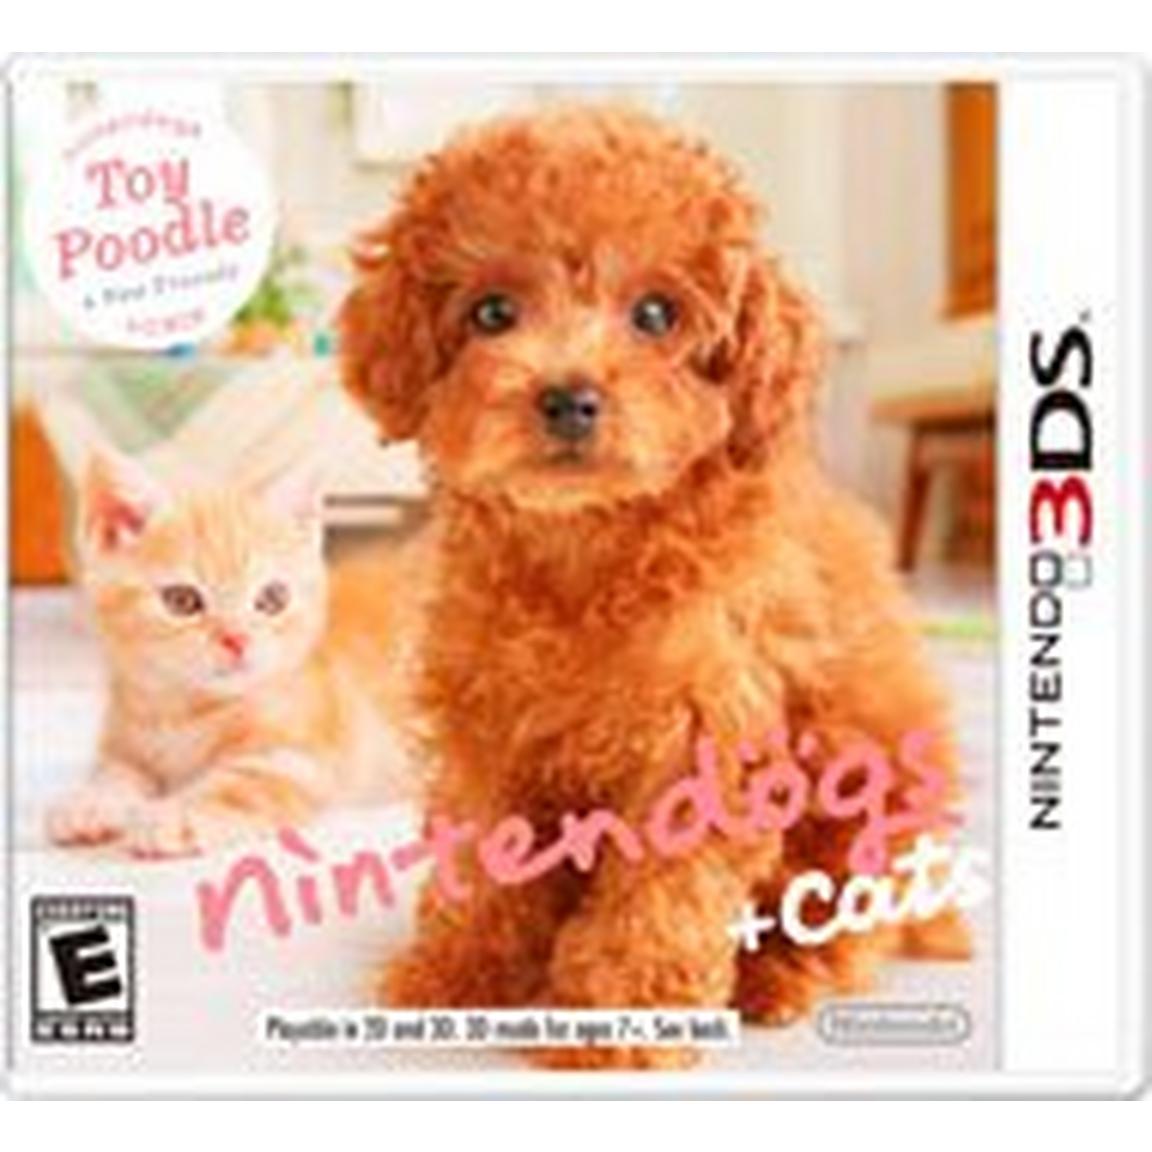 nintendogs plus cats: Toy Poodle and Friends - Nintendo 3DS, Pre-Owned